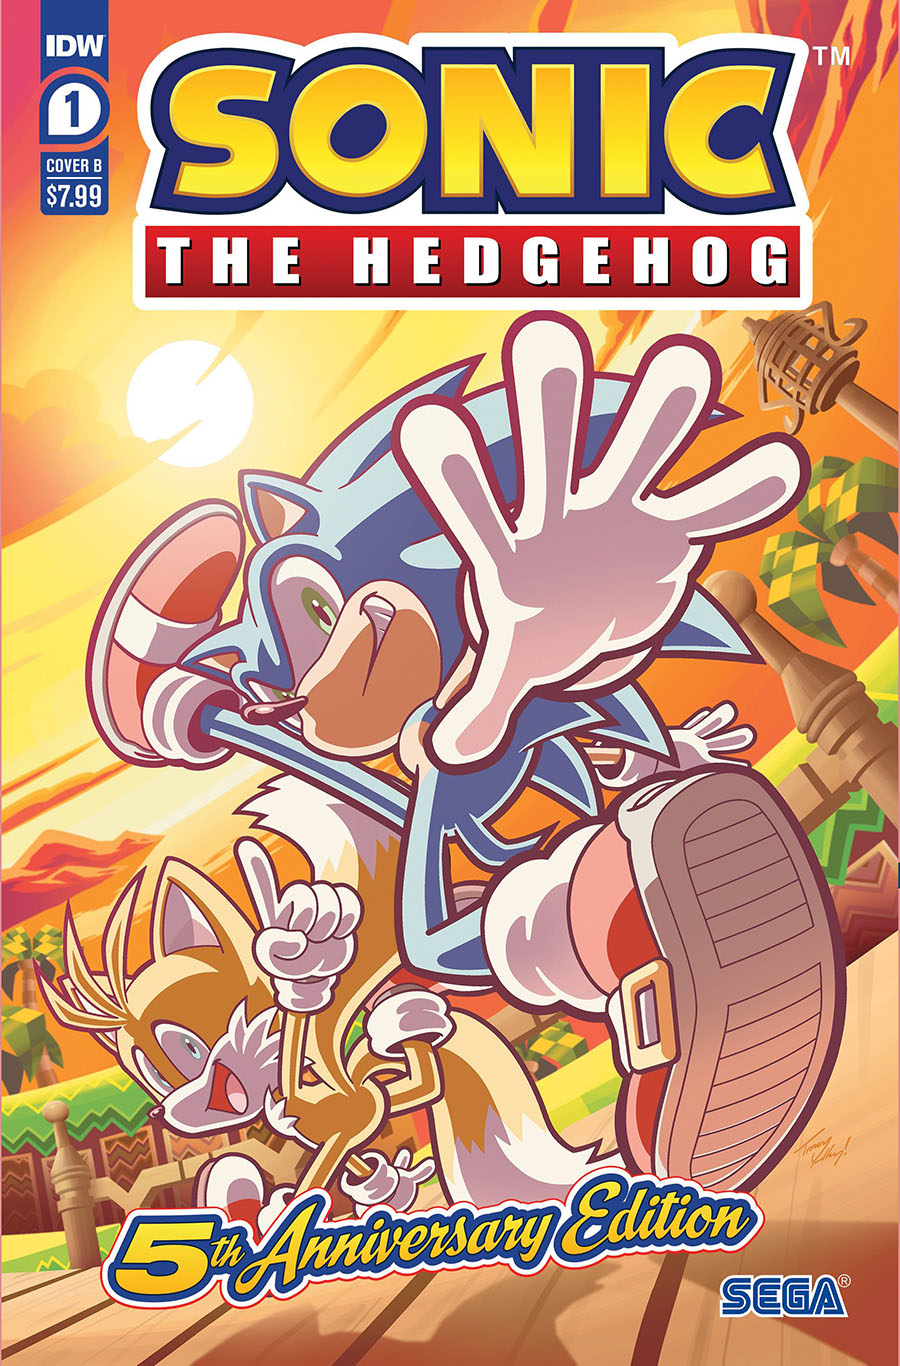 Sonic The Hedgehog Vol 3 #1 5th Anniversary Edition Cover B Variant Tracy Yardley Cover